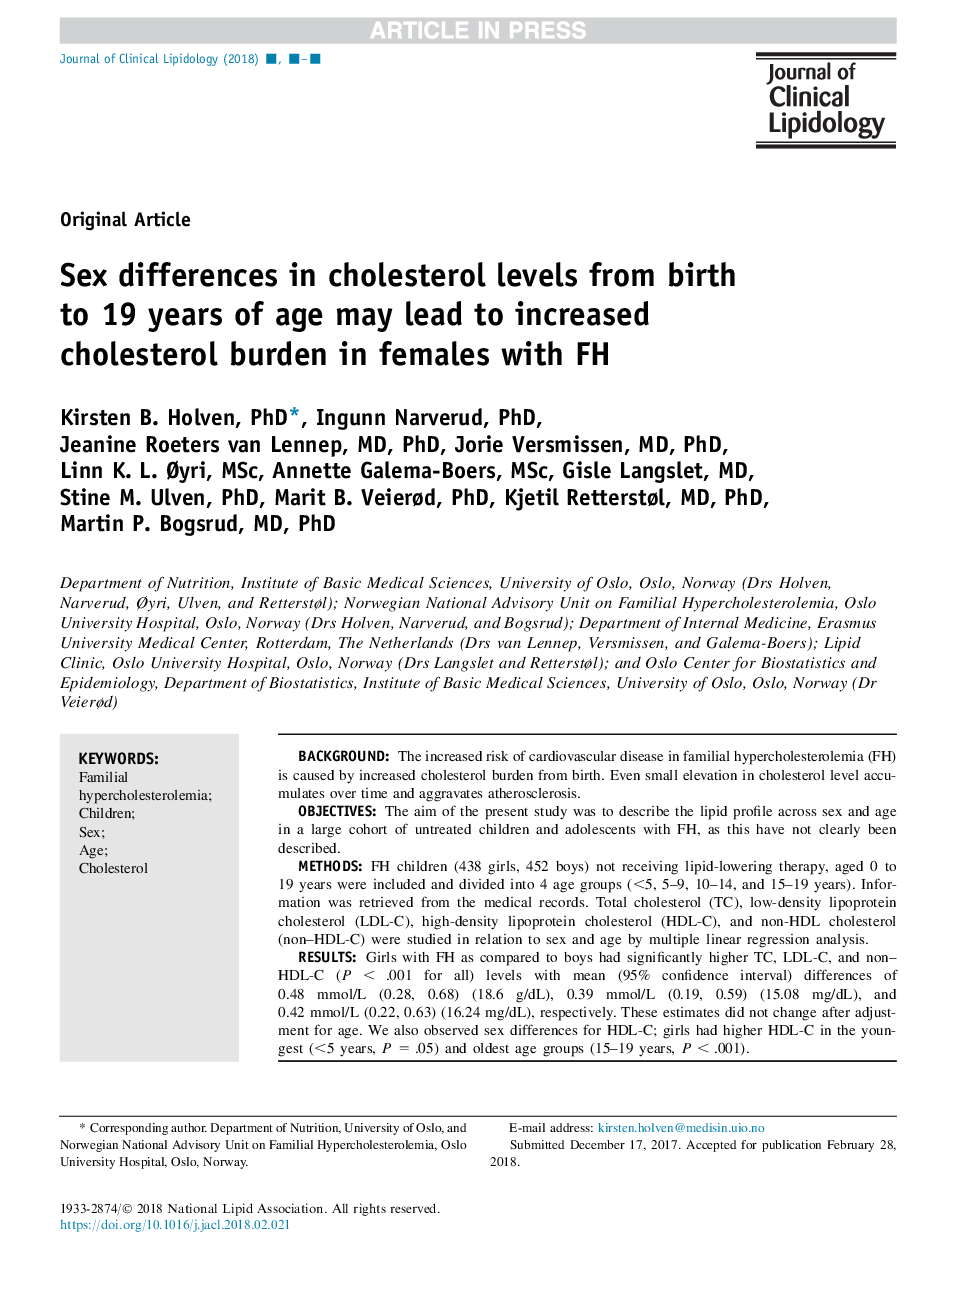 Sex differences in cholesterol levels from birth to 19Â years of age may lead to increased cholesterol burden in females with FH